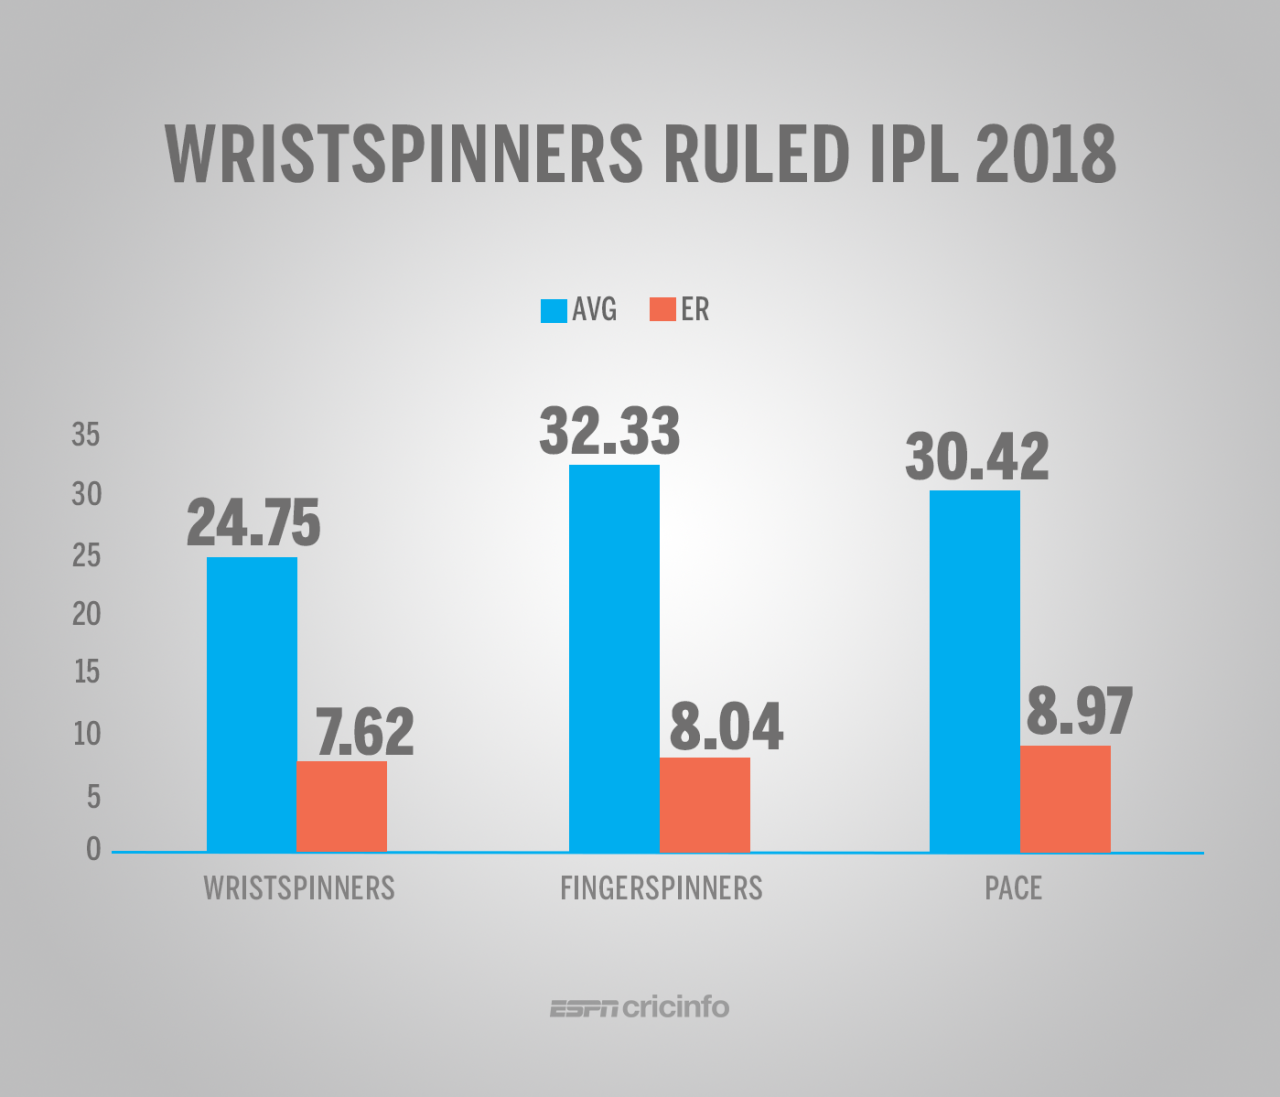 Wristspinners had the best combined average and economy rate of all types of bowlers in IPL 2018